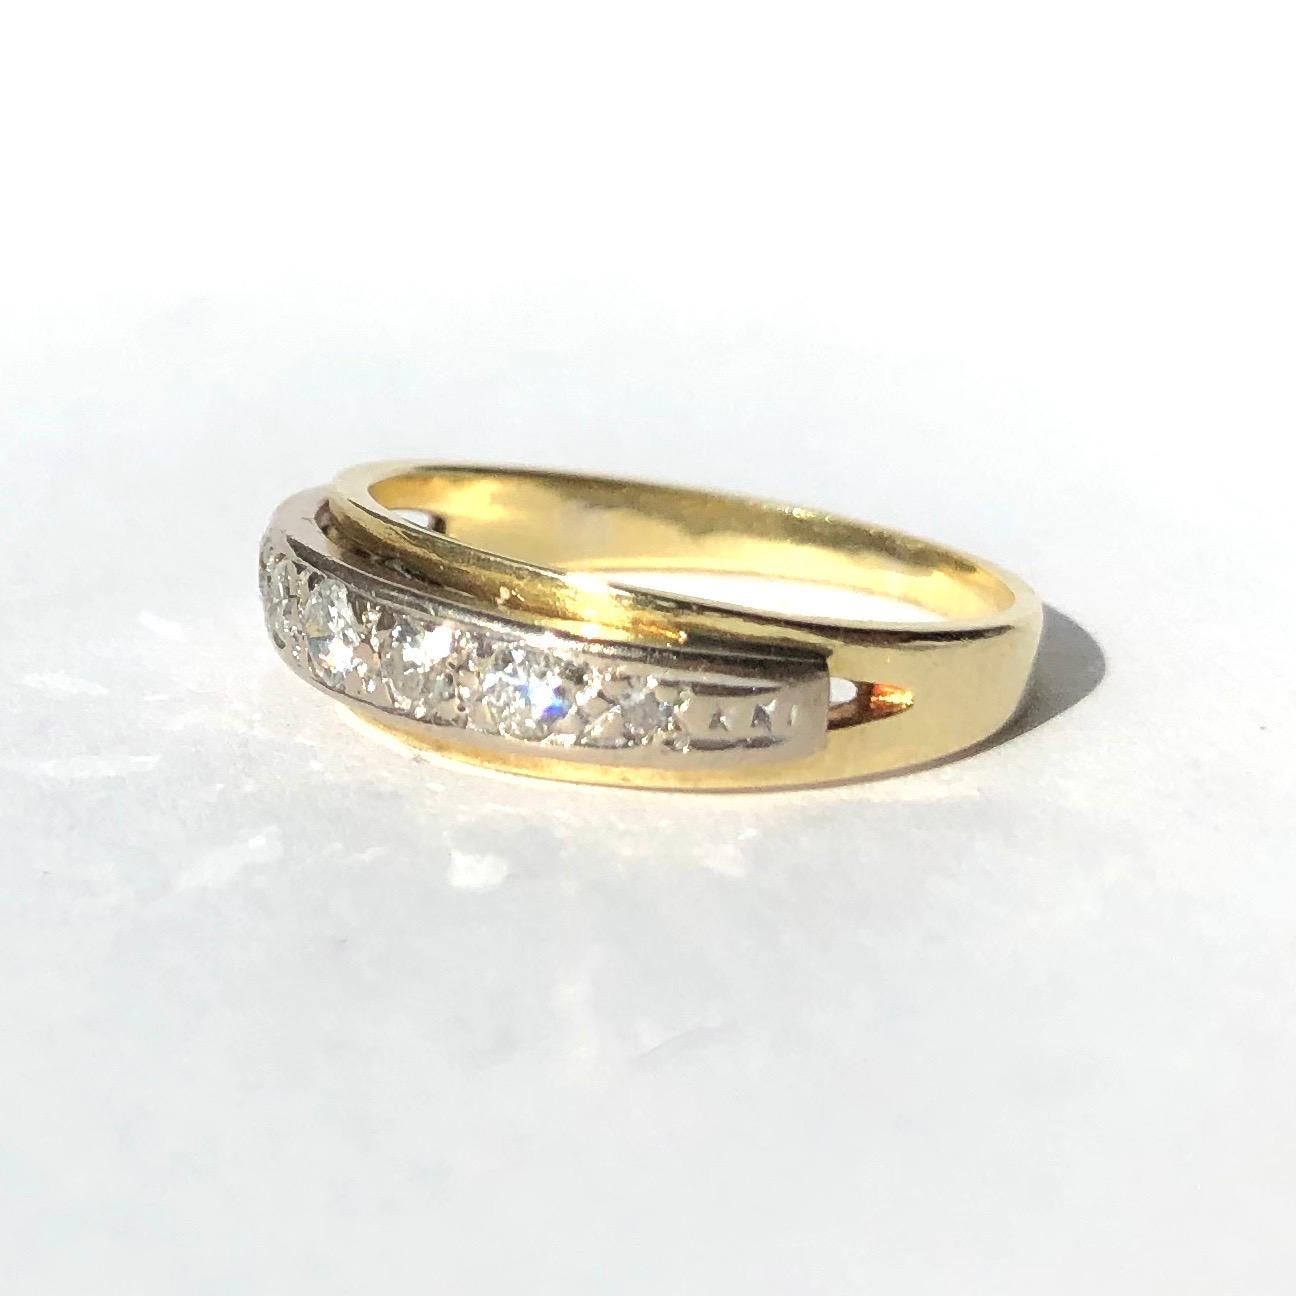 Sitting round upon this 18ct yellow gold band is a platinum panel which holds seven diamonds. The stones graduate in size with the largest diamond at the centre measures 10pts and the smallest measures 3pts. Made in London, England. 

Ring Size: L